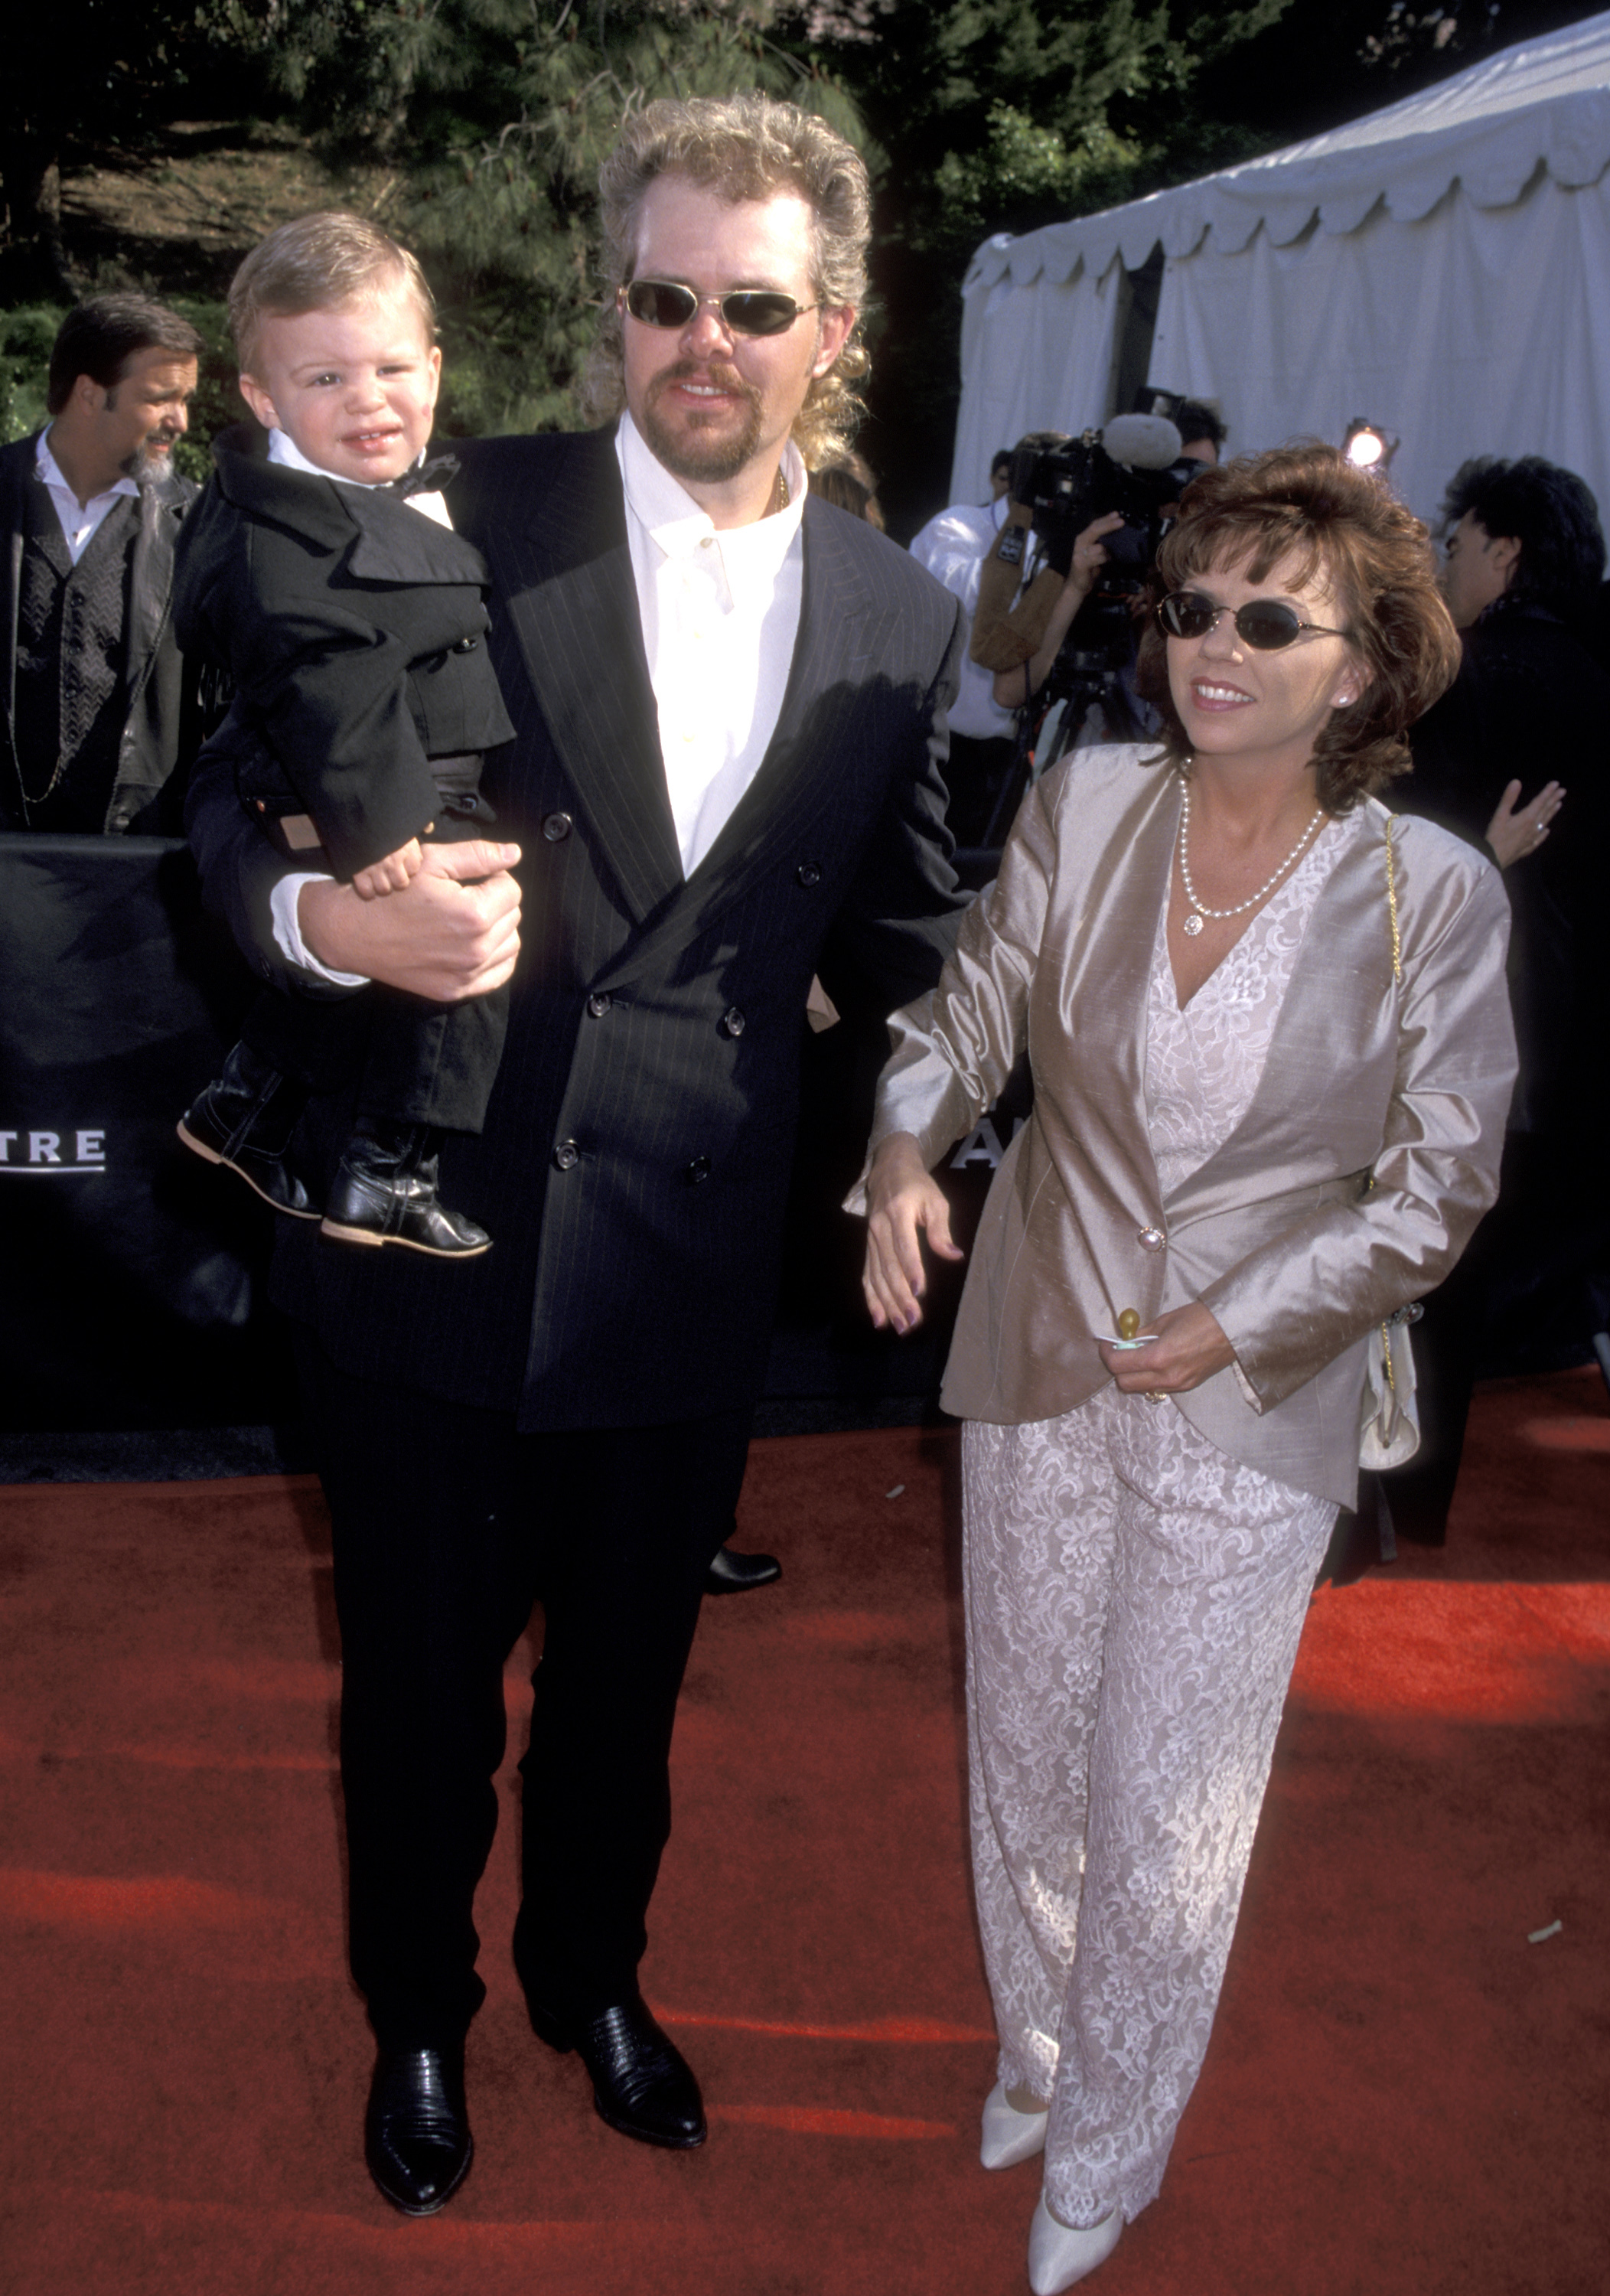 Toby Keith with is wife Tricia and son Stelen at the Country Music Awards in 1998 | Source: Getty Images